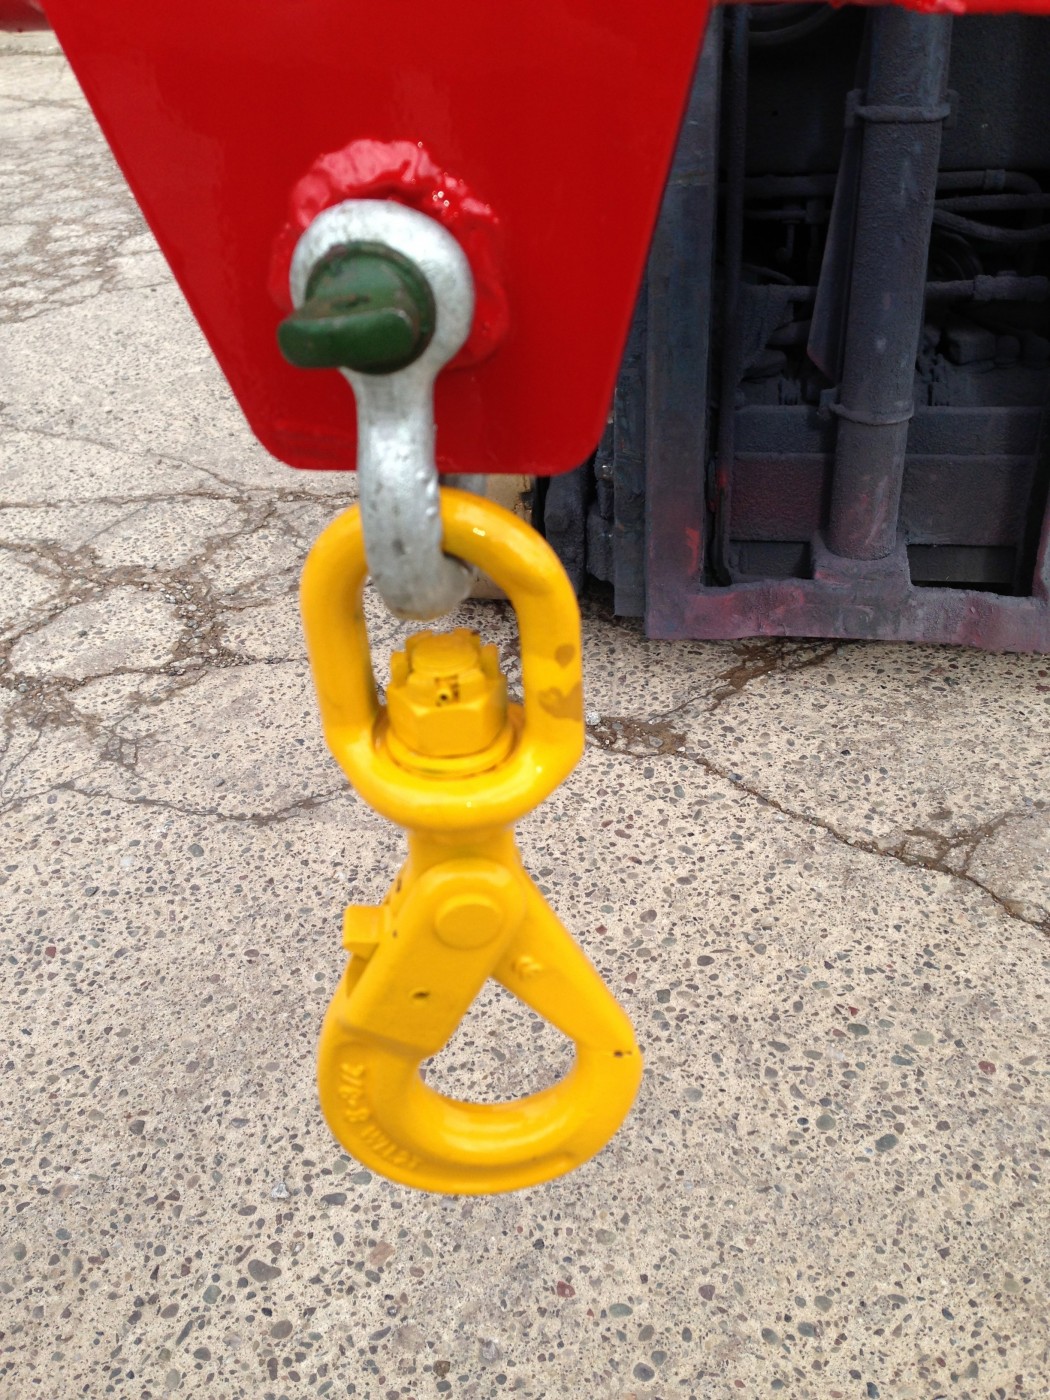 Swivel Lifting Hook with Shackle